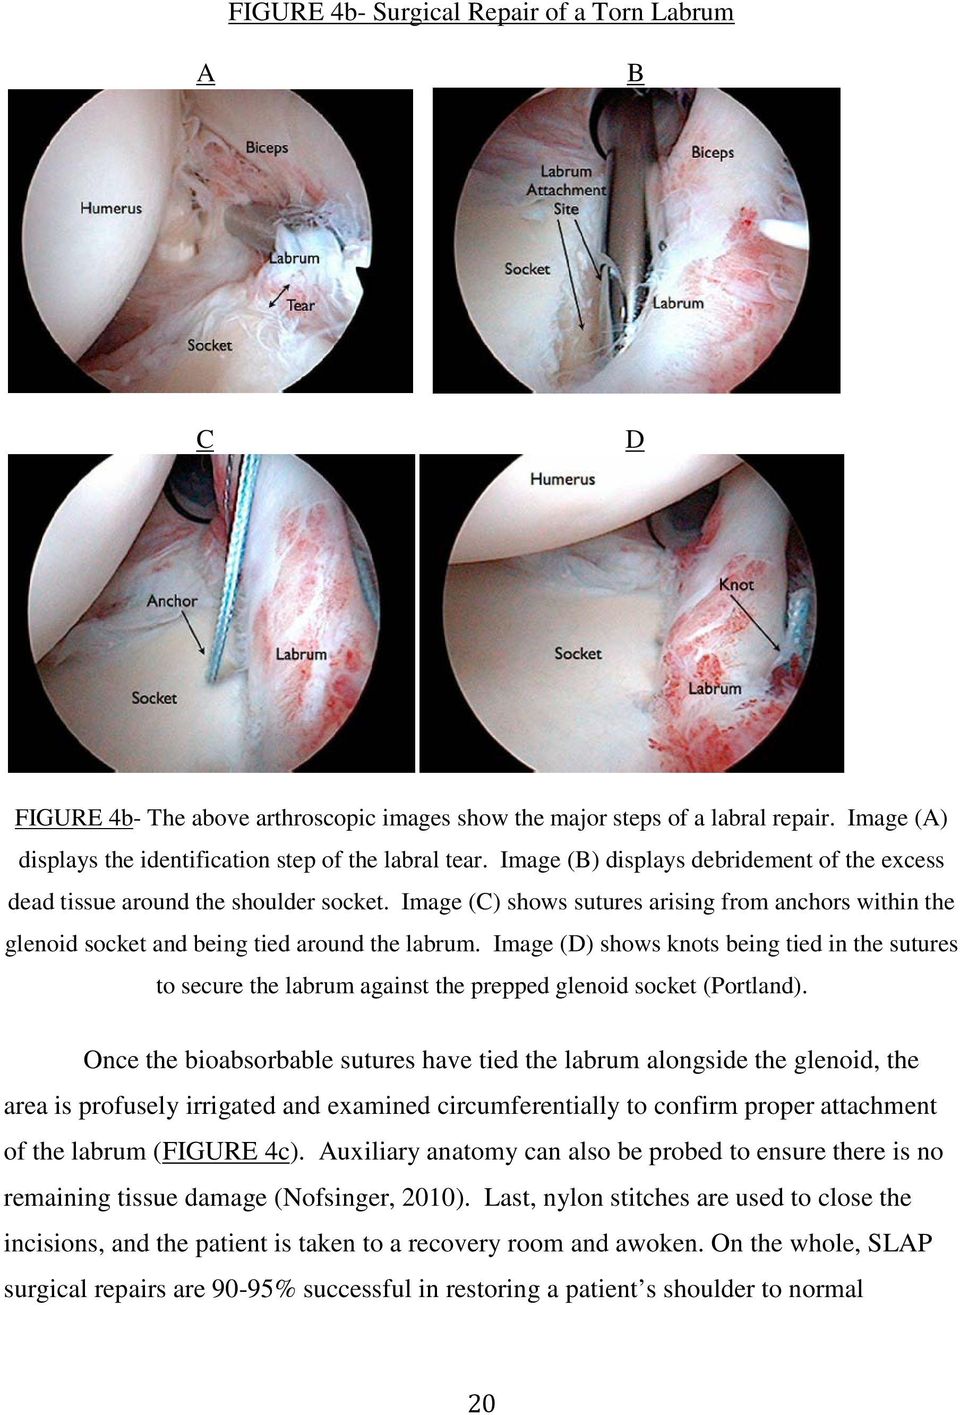 Image (D) shows knots being tied in the sutures to secure the labrum against the prepped glenoid socket (Portland).